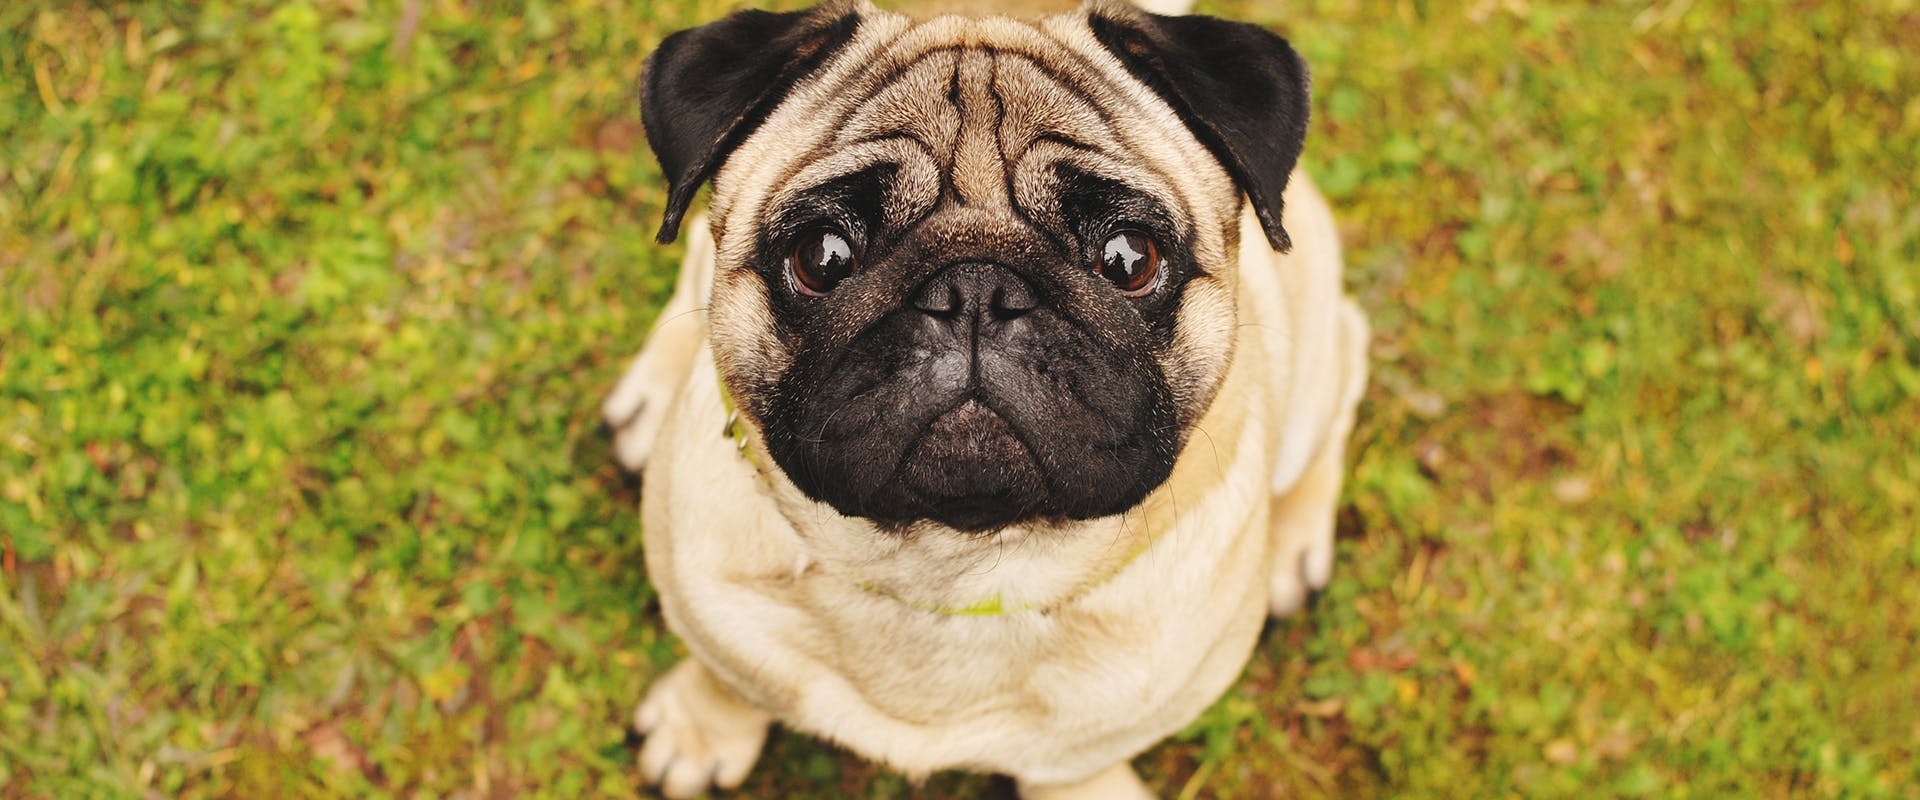 A cute pug looking up to the camera